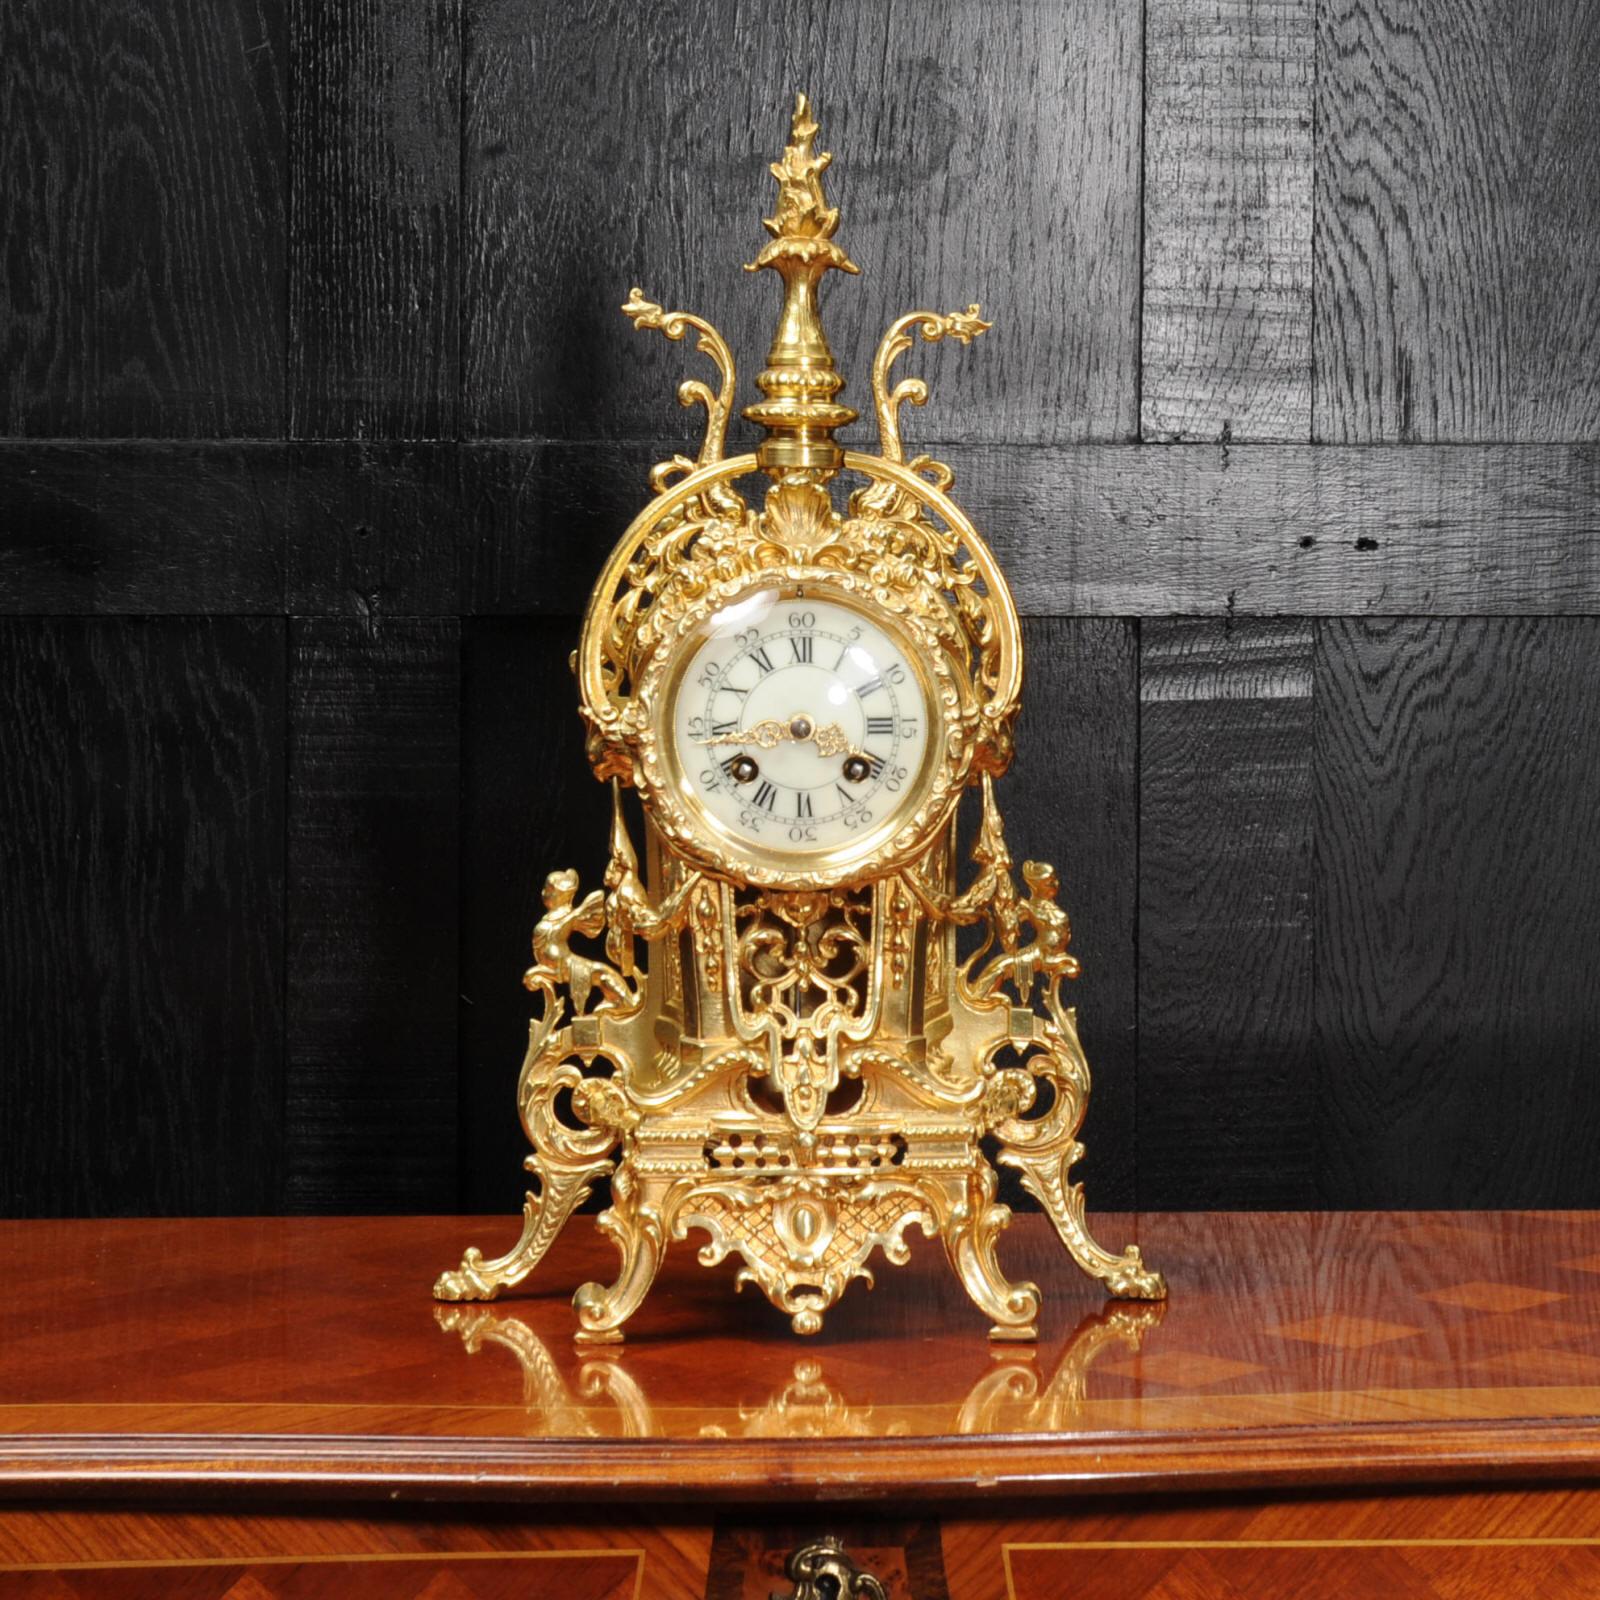 A beautiful original antique French clock in the Baroque style, circa 1890. A tall flaming finial is flanked by the stylised tails of two dolphins. The sides are draped with floral swags and scrolls with mythical creatures. The clock sits on boldly